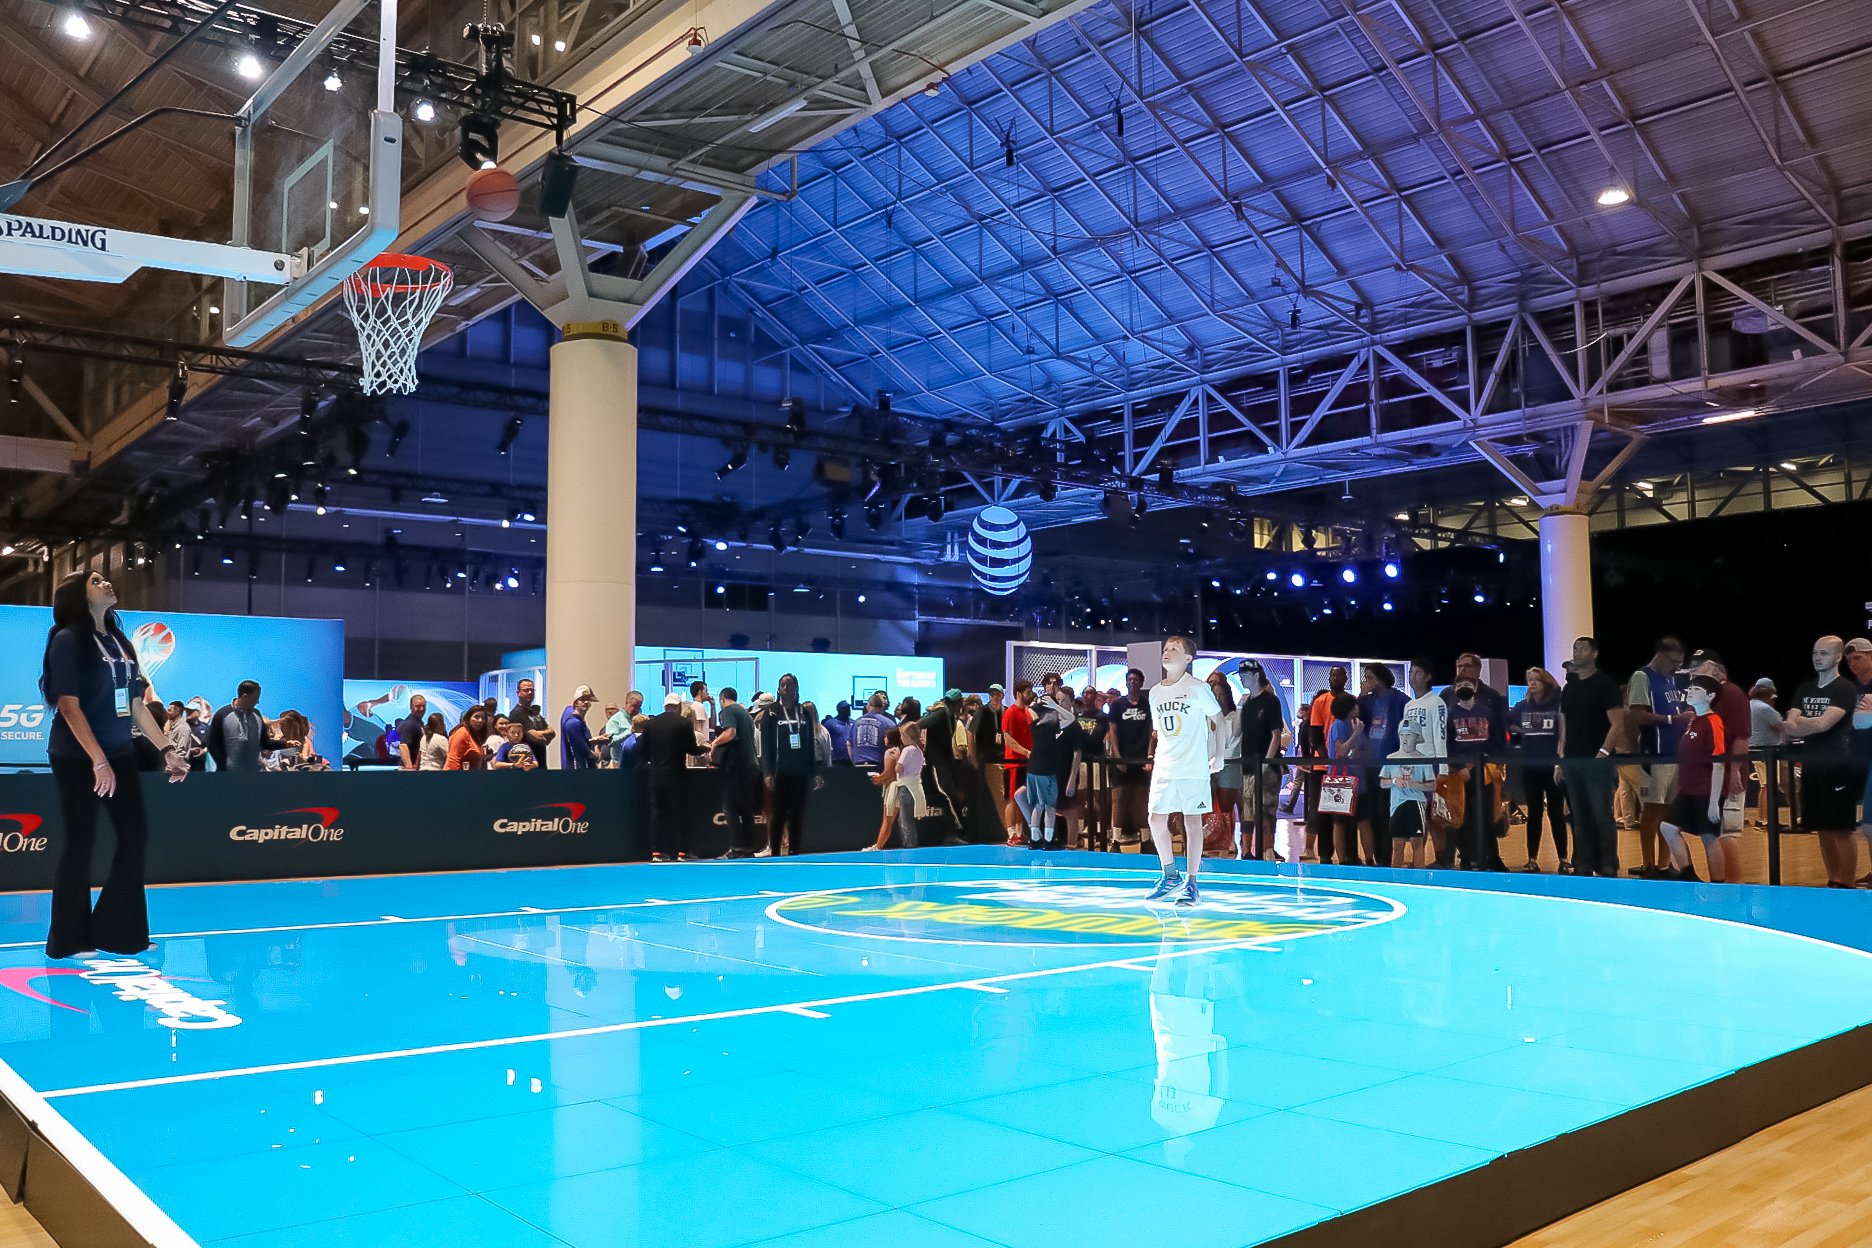 An image of a bright blue court sponsored by Capital One. A crowd of people is seen behind the court, along with other booths.